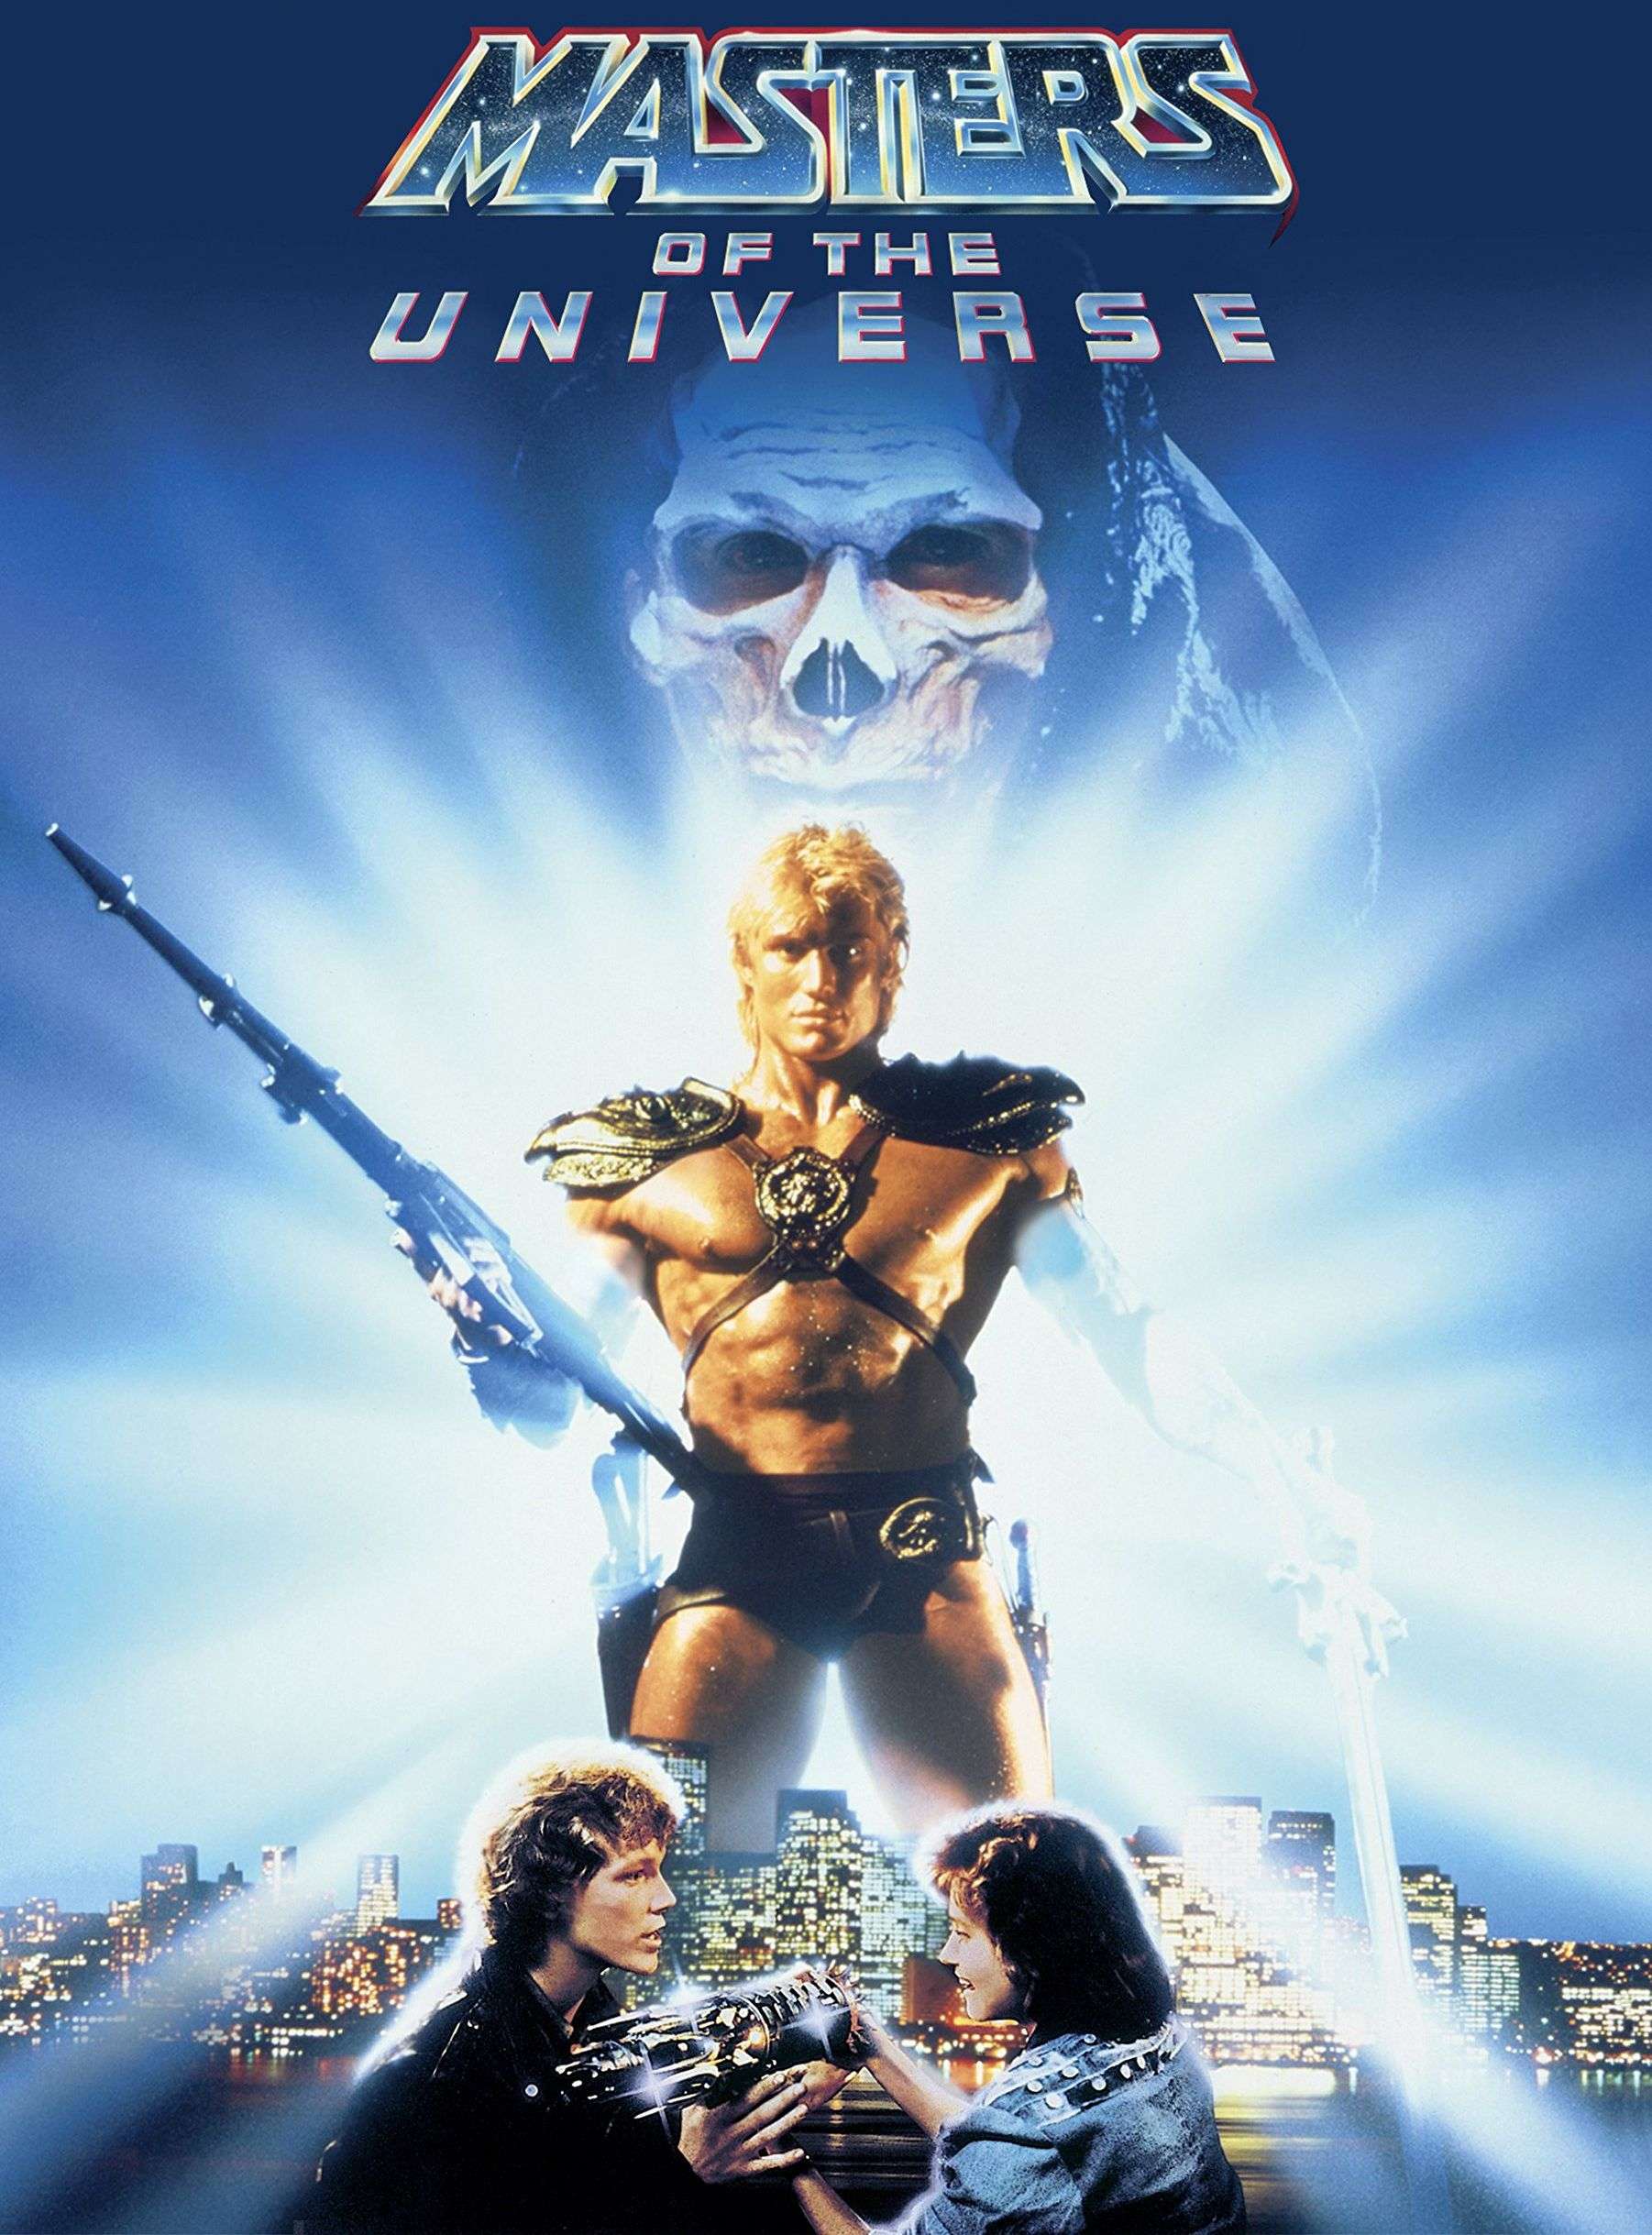 The Live-Action Movie in 1987